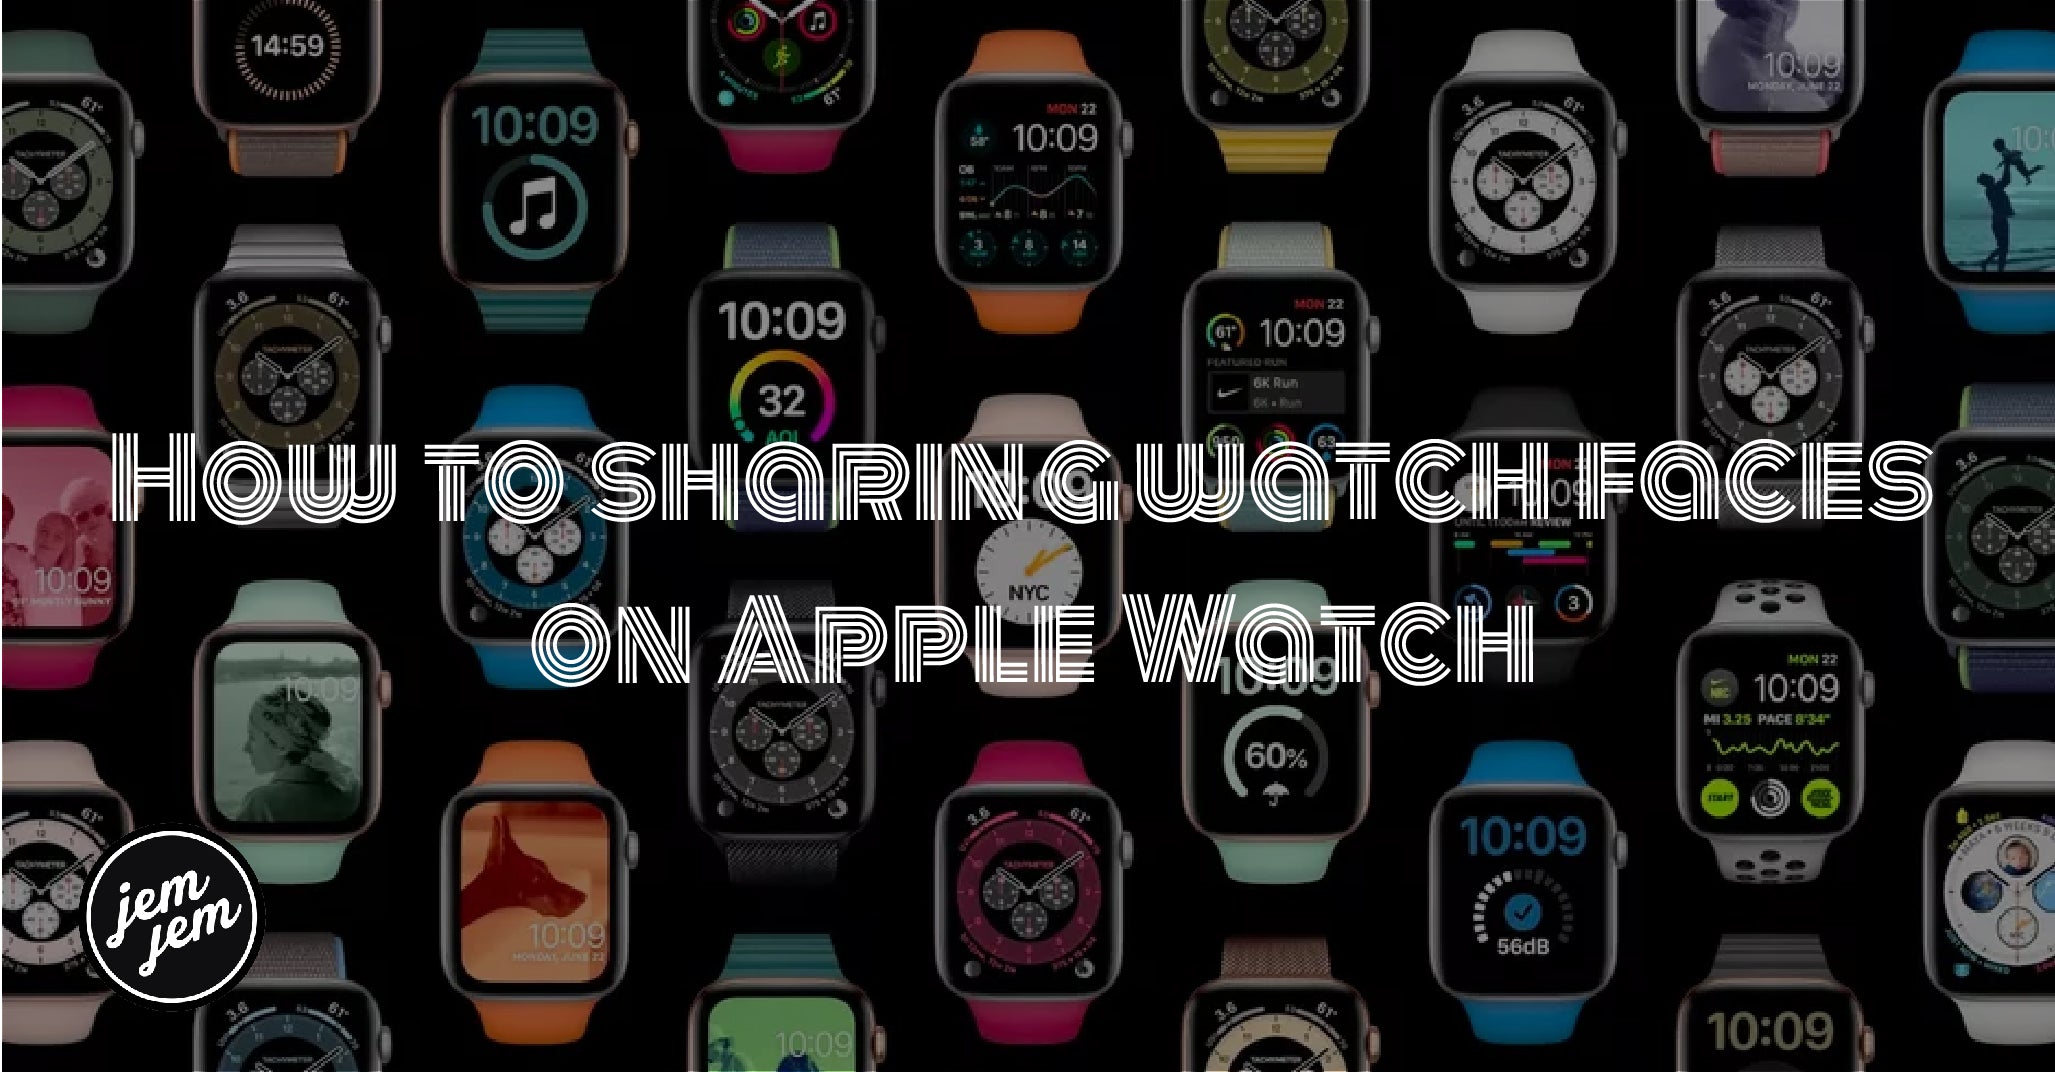 How to sharing watch faces on Apple Watch